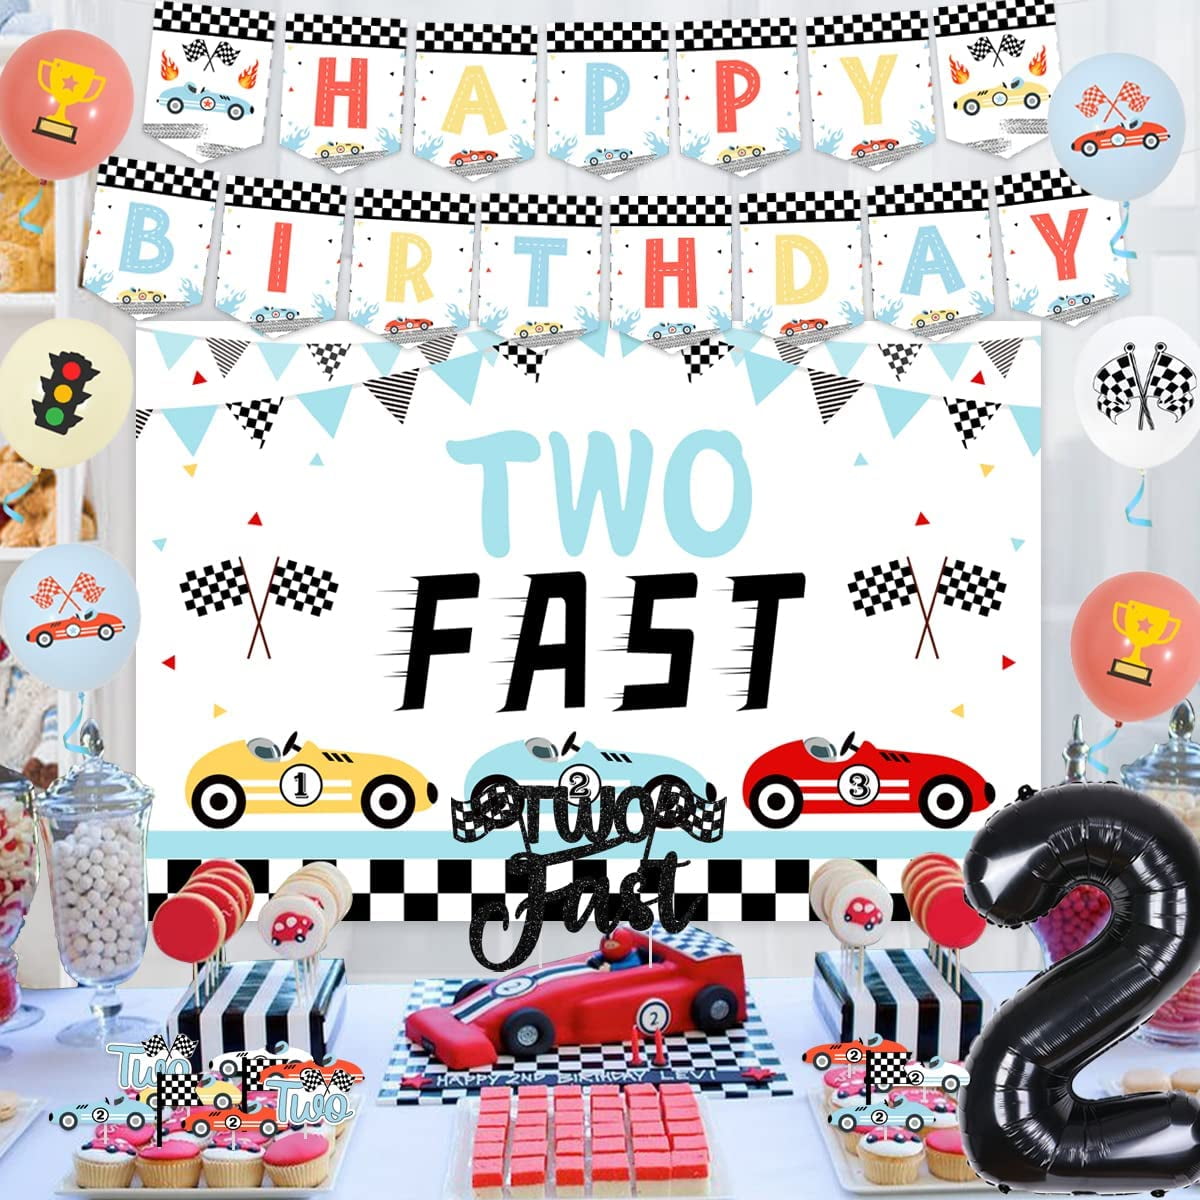 Vintage Two Fast Birthday Decorations for Boy, Retro Race Car 2nd Birthday Party Decorations - Two Fast Backdrop, Cake & Cupcake Toppers, Happy Birthday Banner, Sports Racing Car Party Supplies - Walmart.com